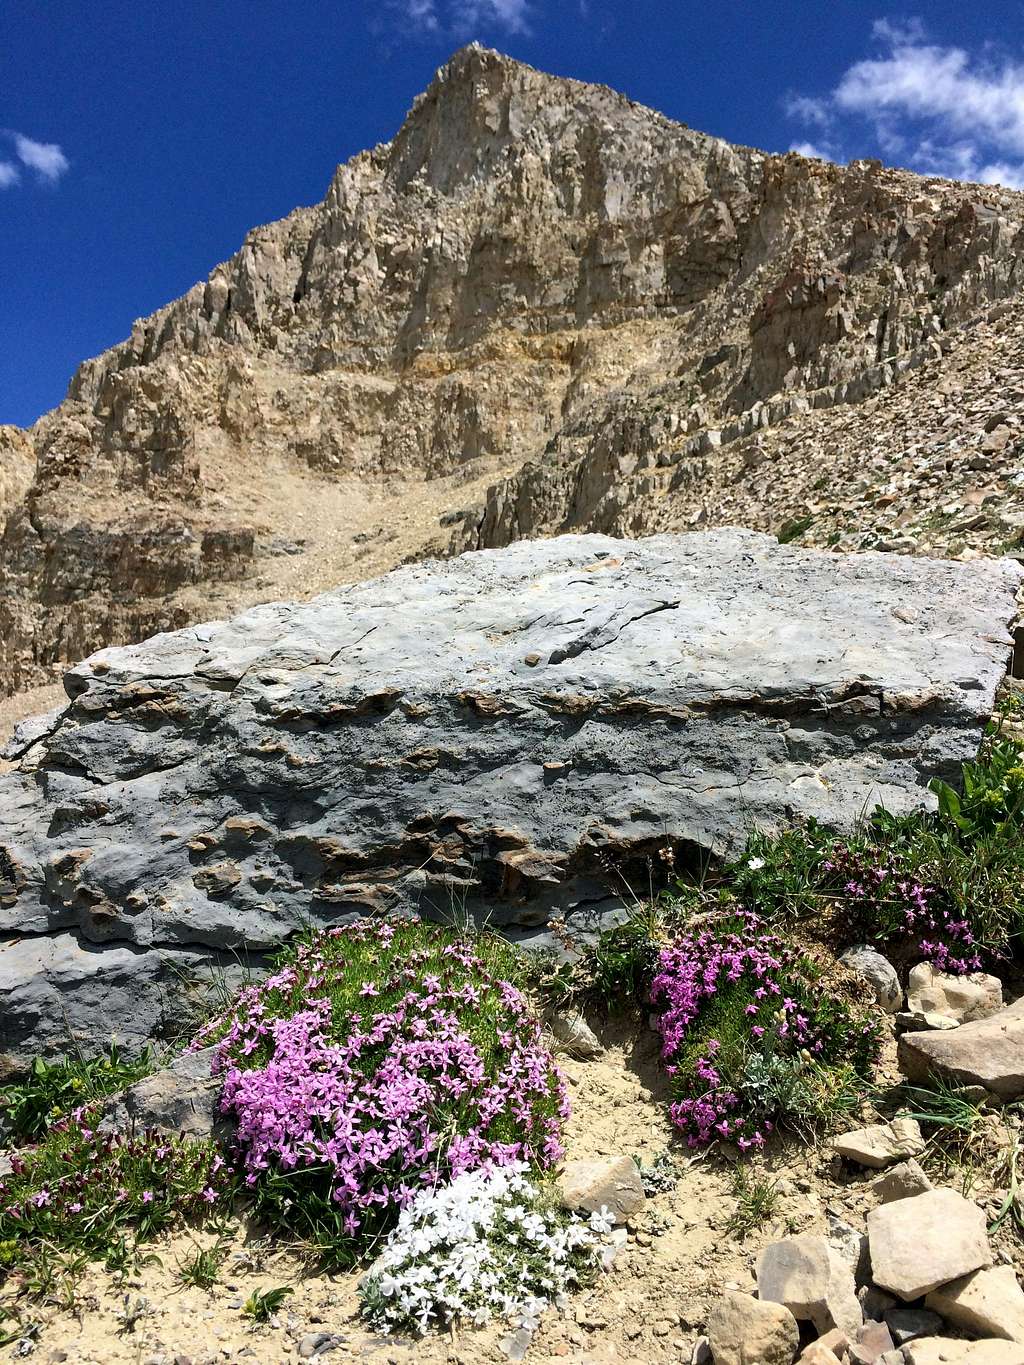 More South Timp wildflowers